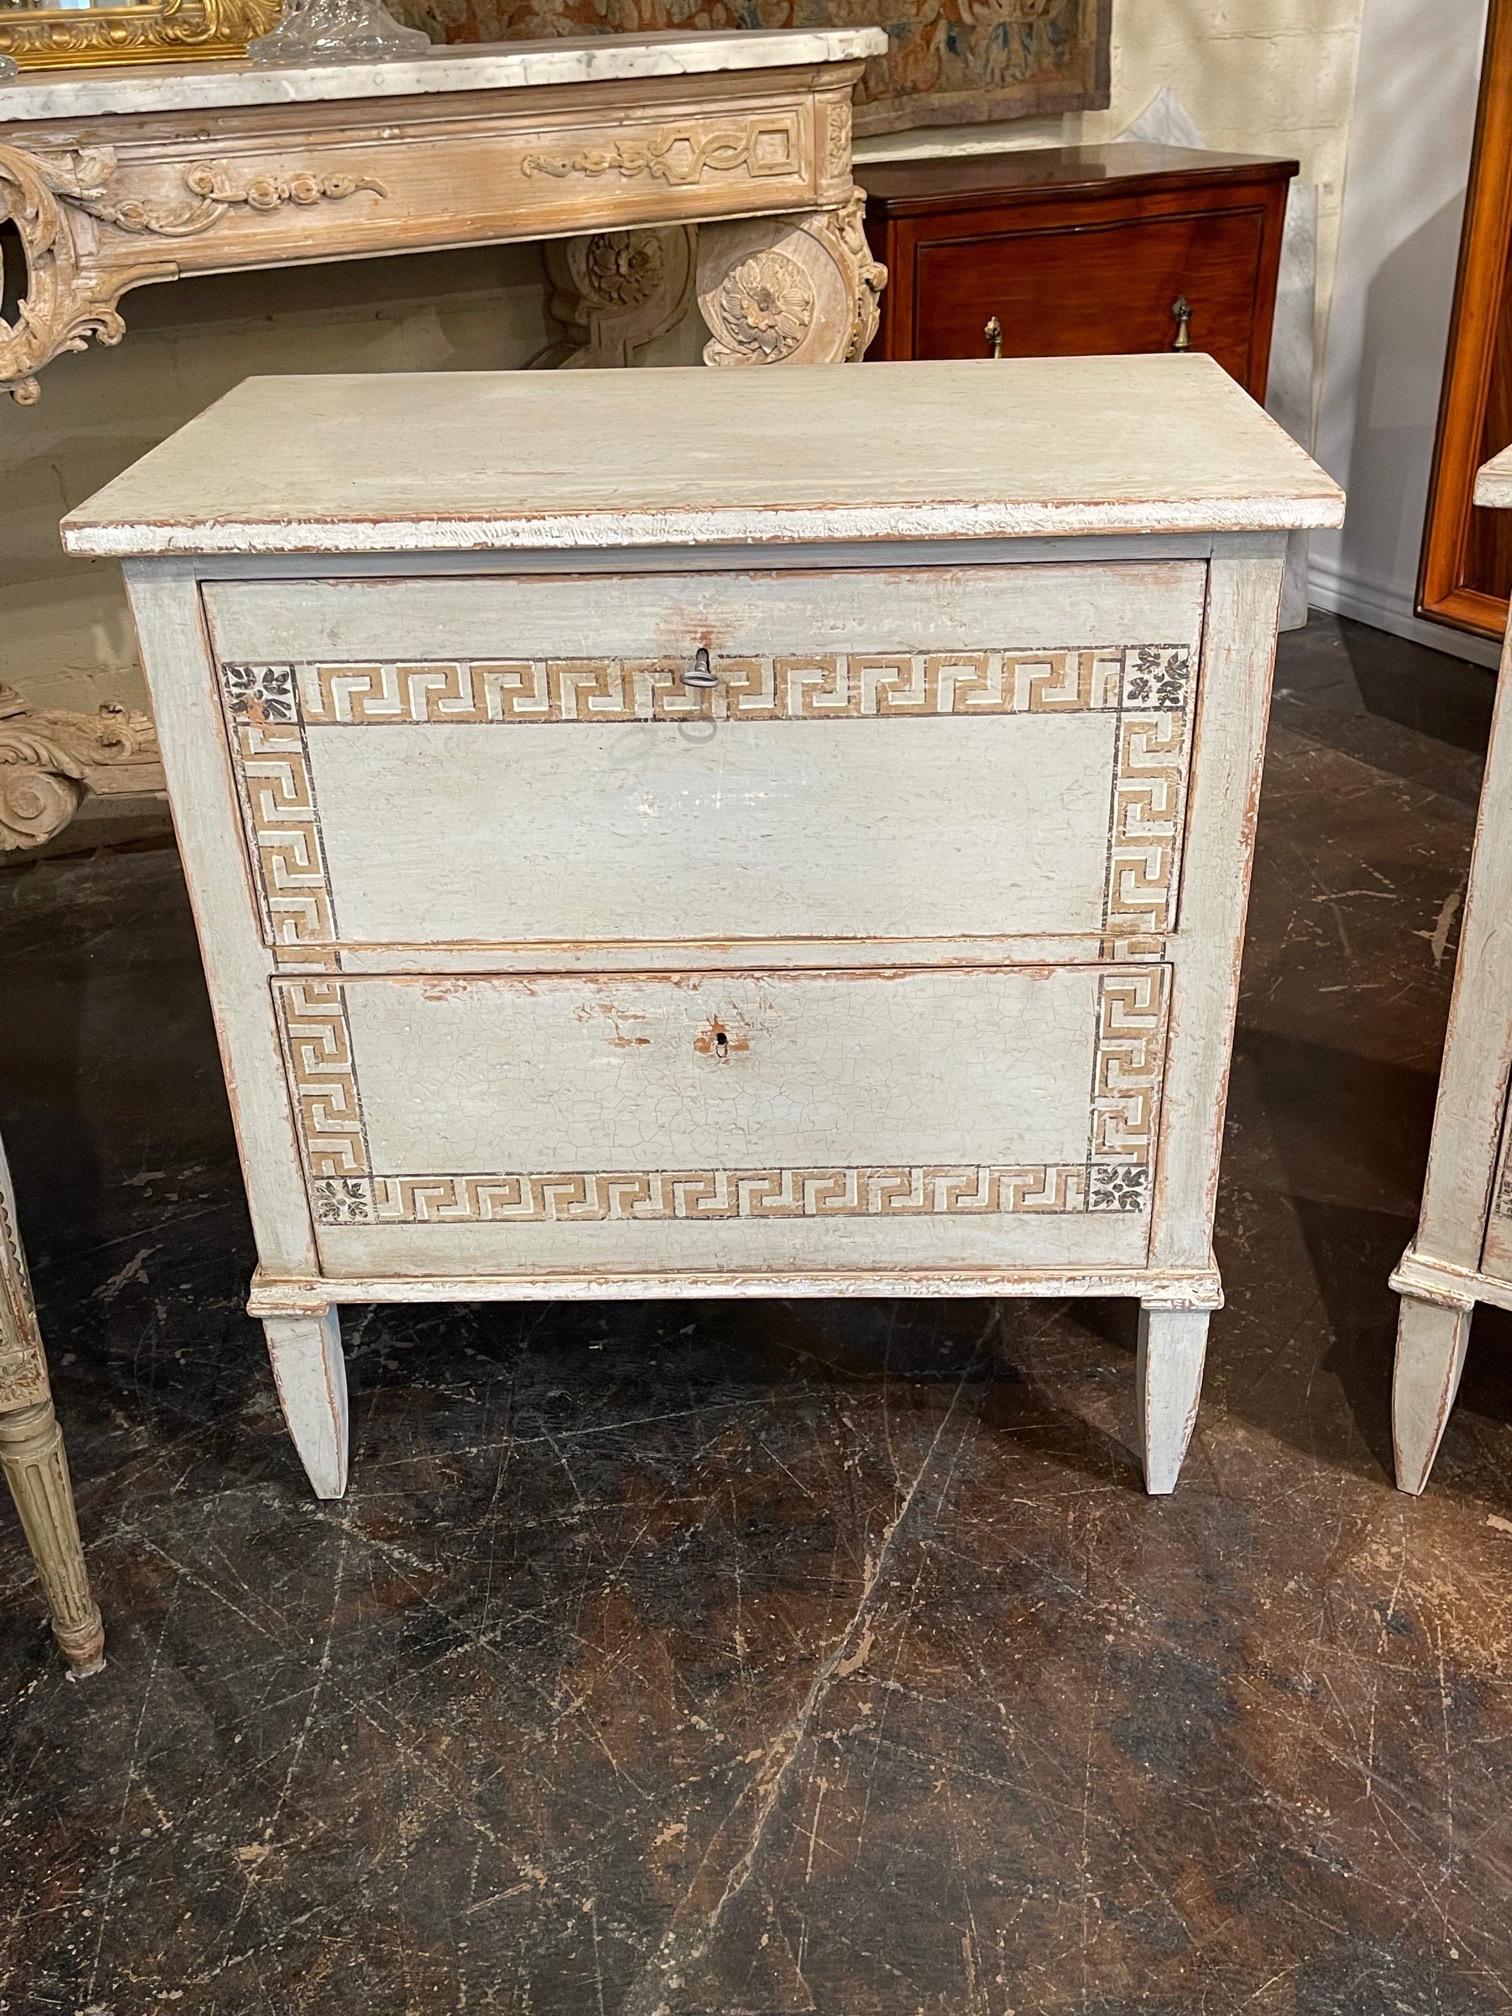 Handsome pair of French Neo-Classical bed side chest with painted Greek Key design. Beautiful patina of a pale grey, gold and black. Creates a beautiful decorative touch!